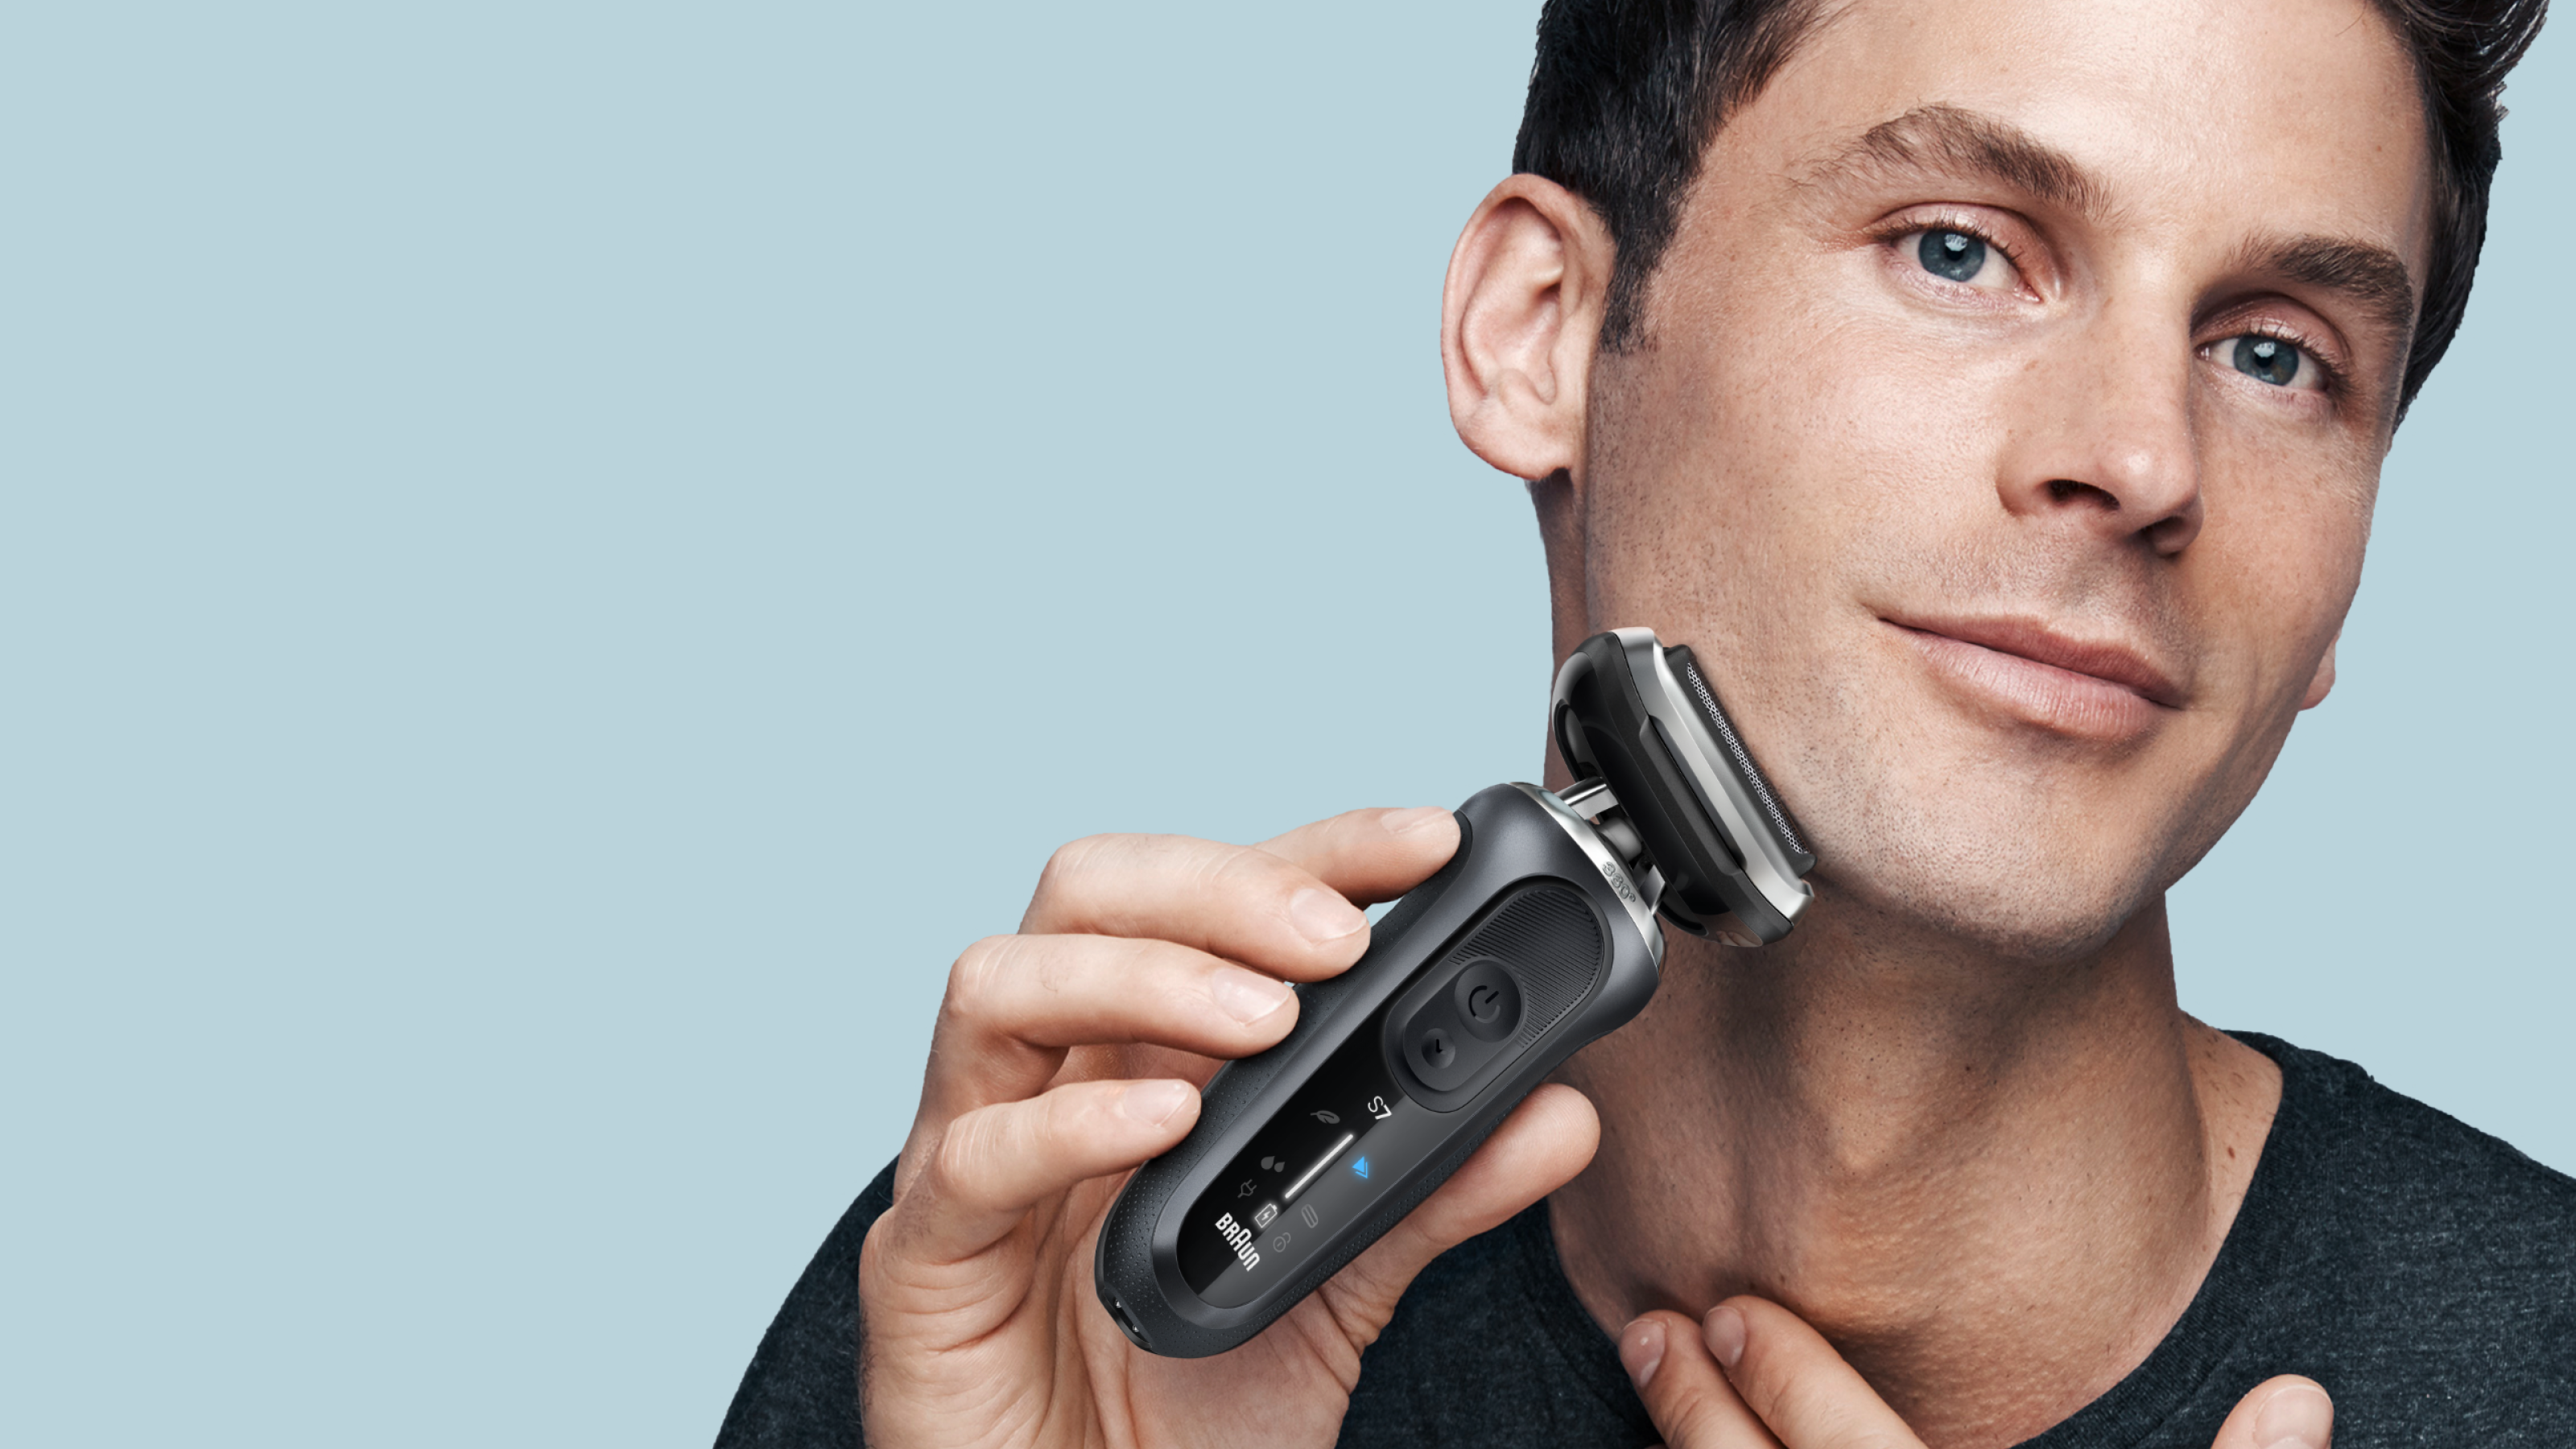 Man shaving his face with Series 7 device, holding the device in one hand, placing his other hand on his neck for support